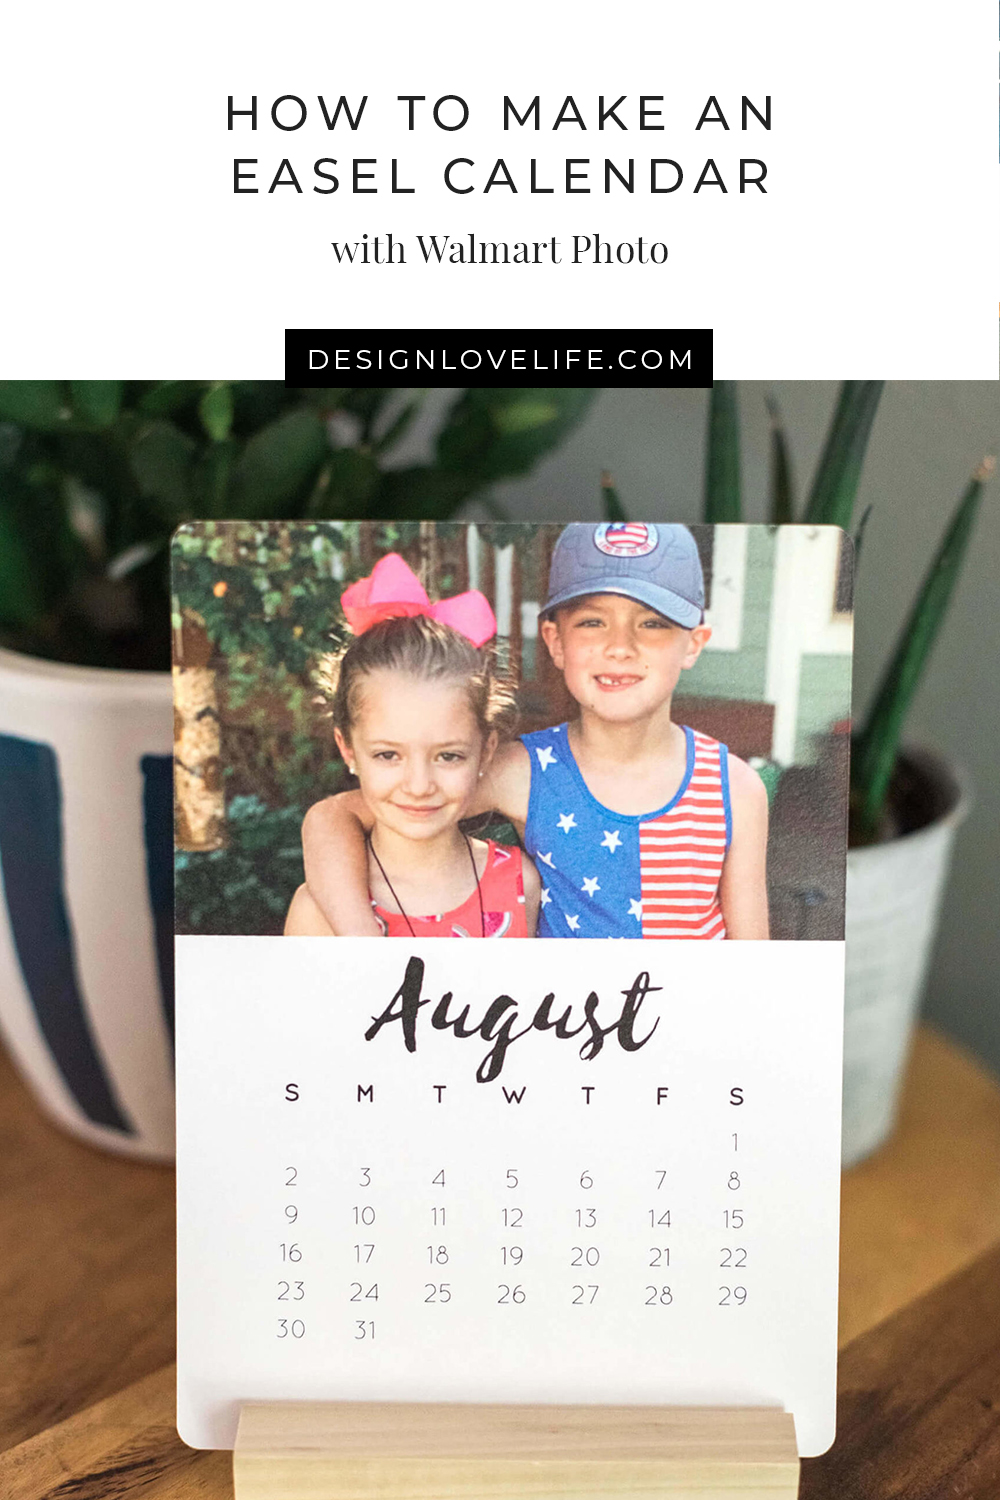 create an easel calendar and upload your favorite images with Design Love Life and Walmart Photo